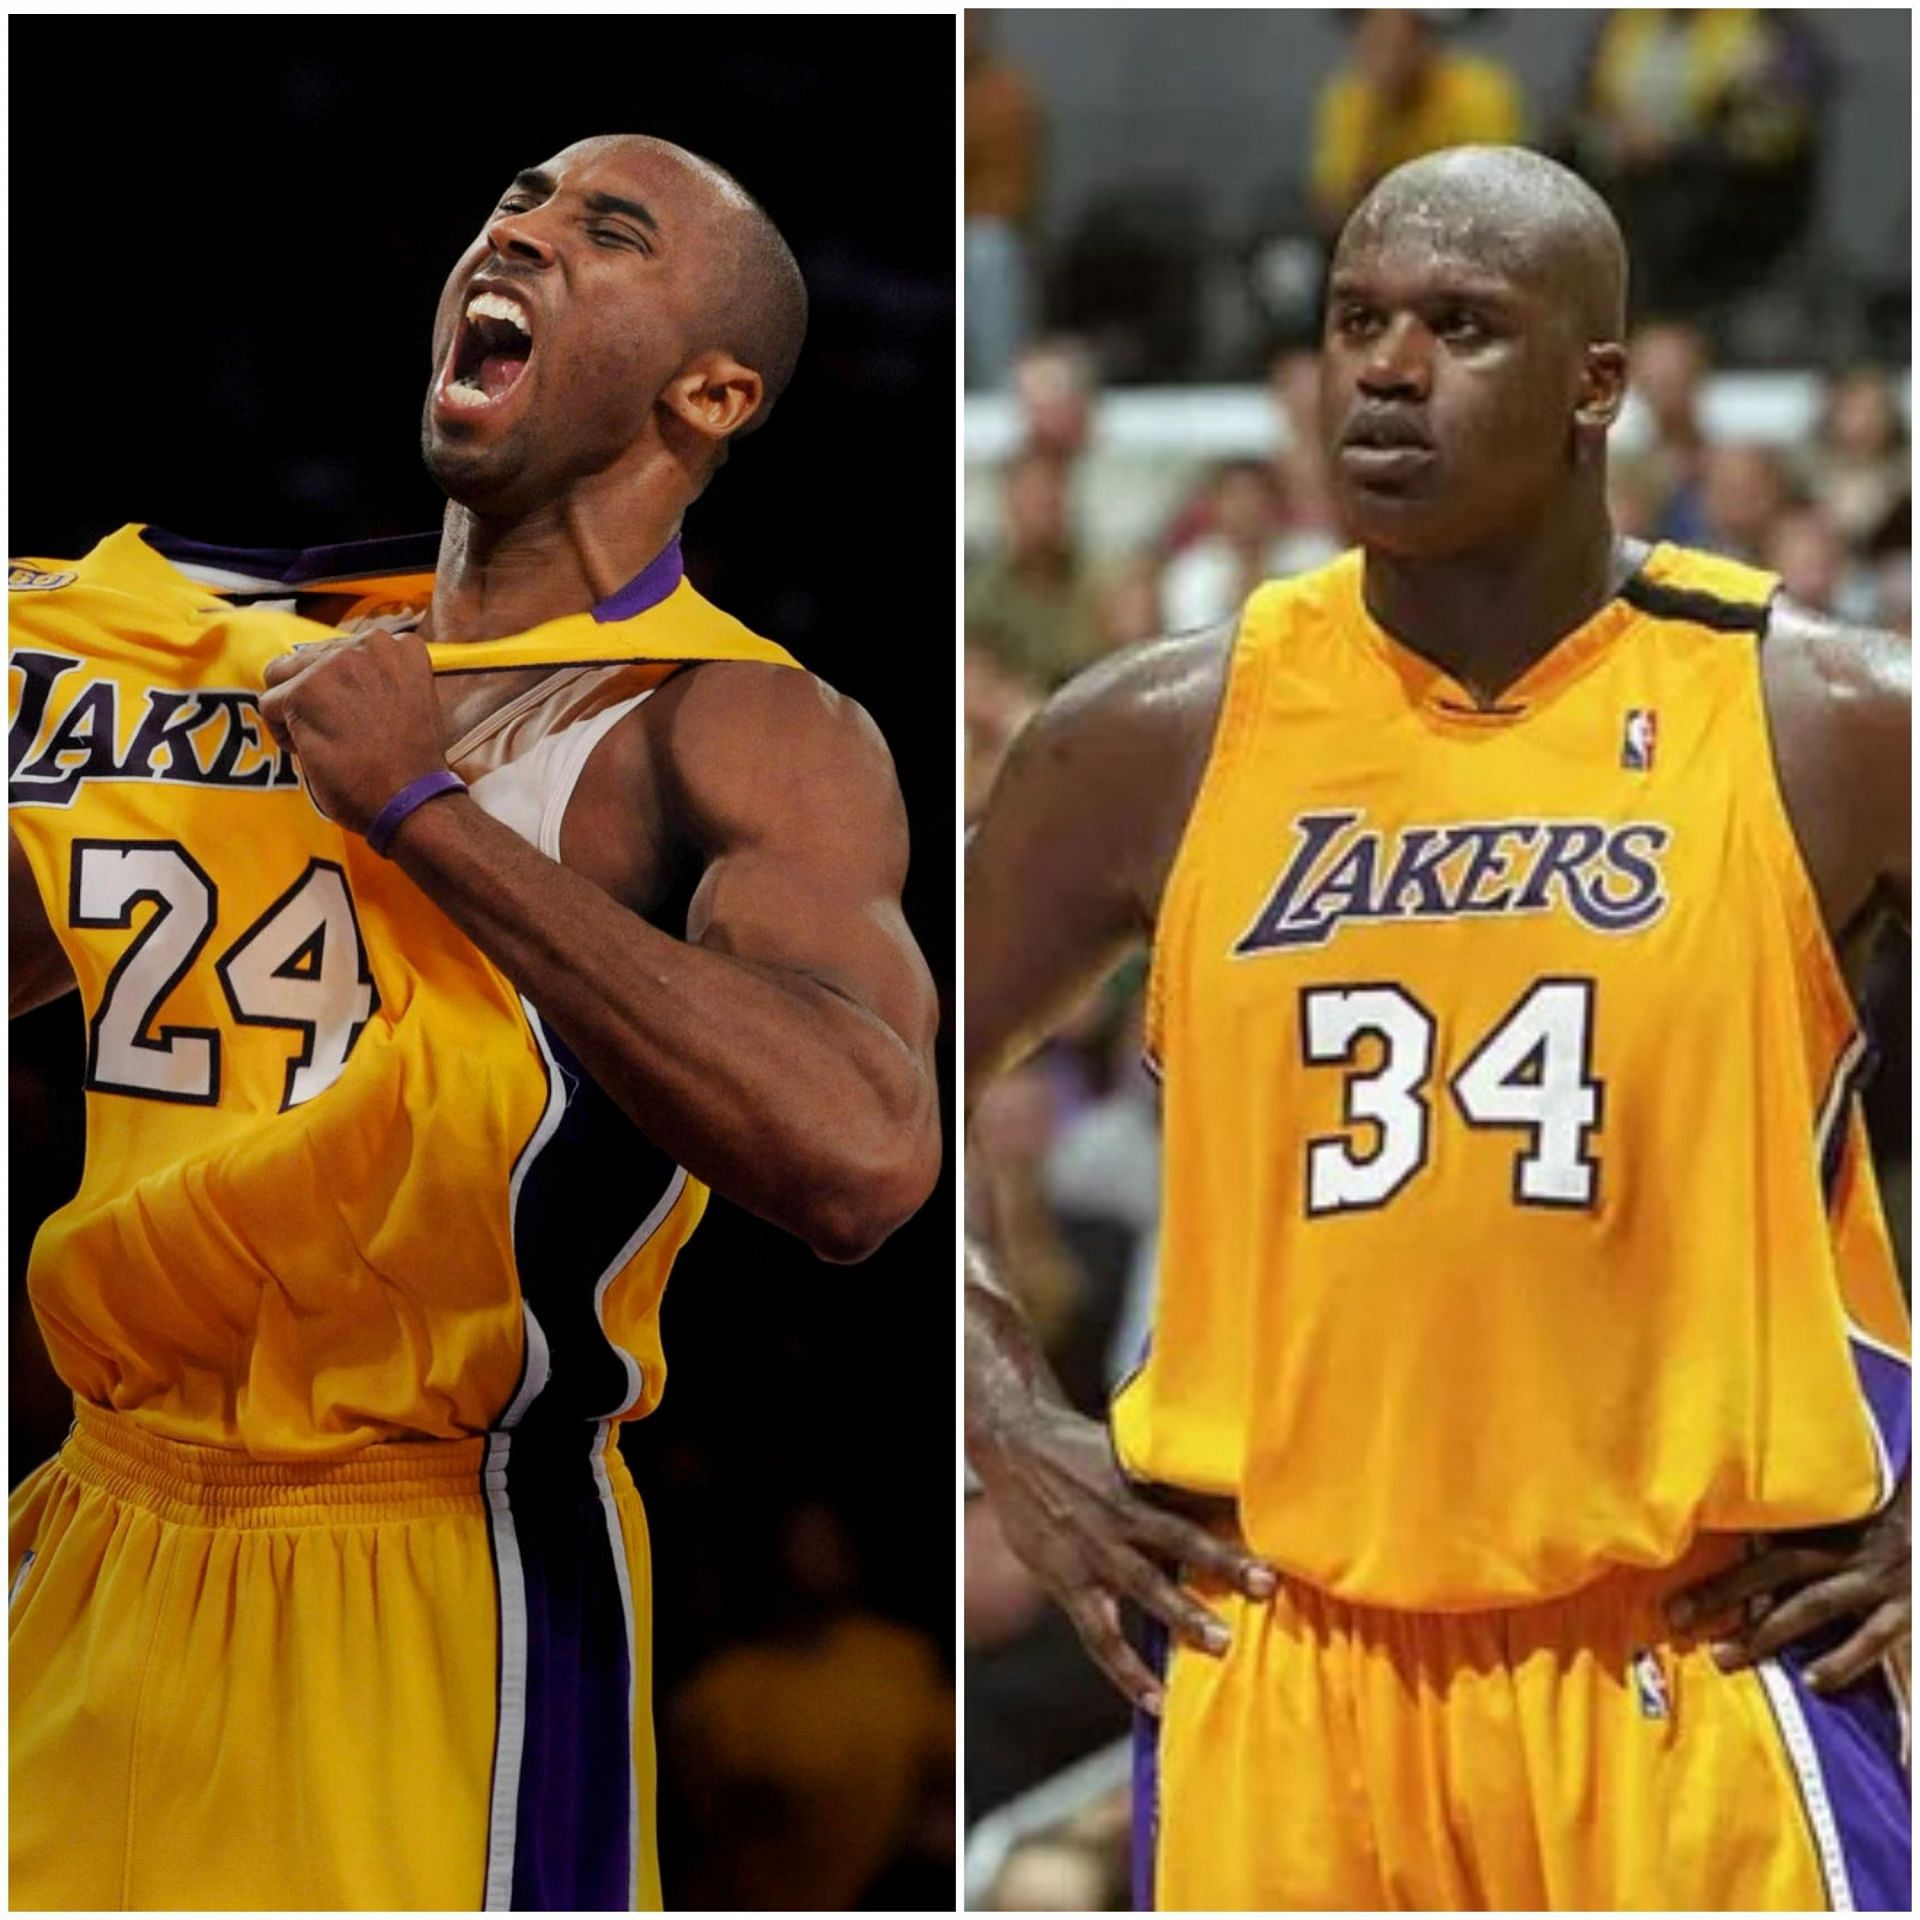 L.A. Lakers: Will Kobe Bryant or Shaquille O'Neal Have the Greater